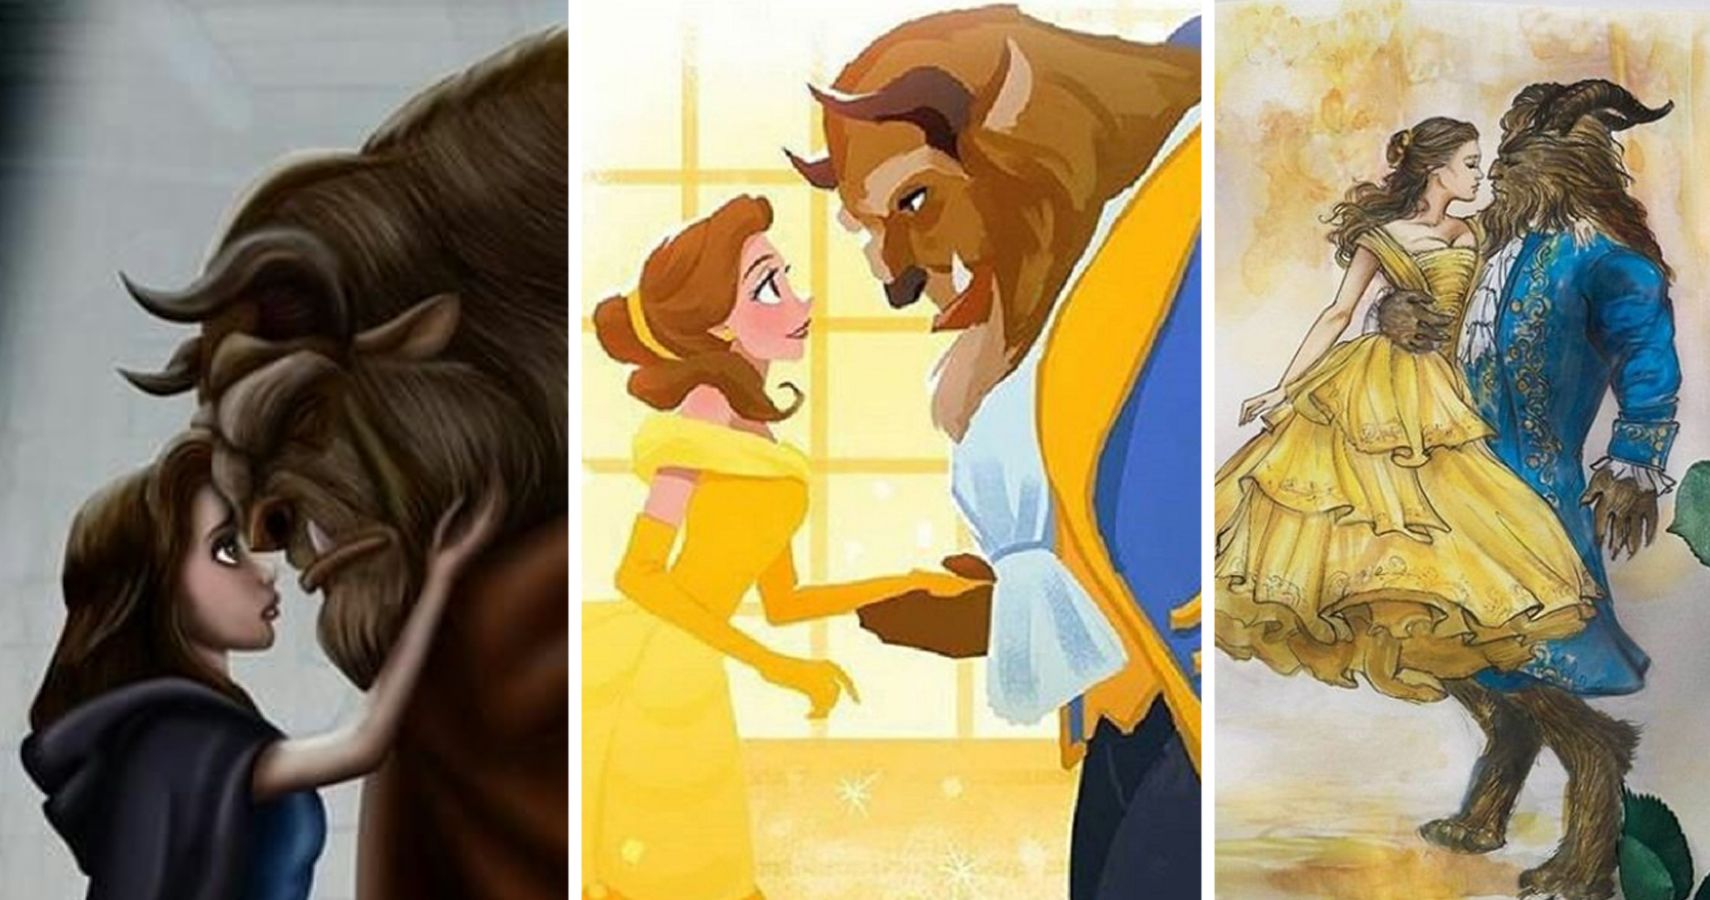 10 Beauty And The Beast Fan Pictures That Show Hes Not A Monster